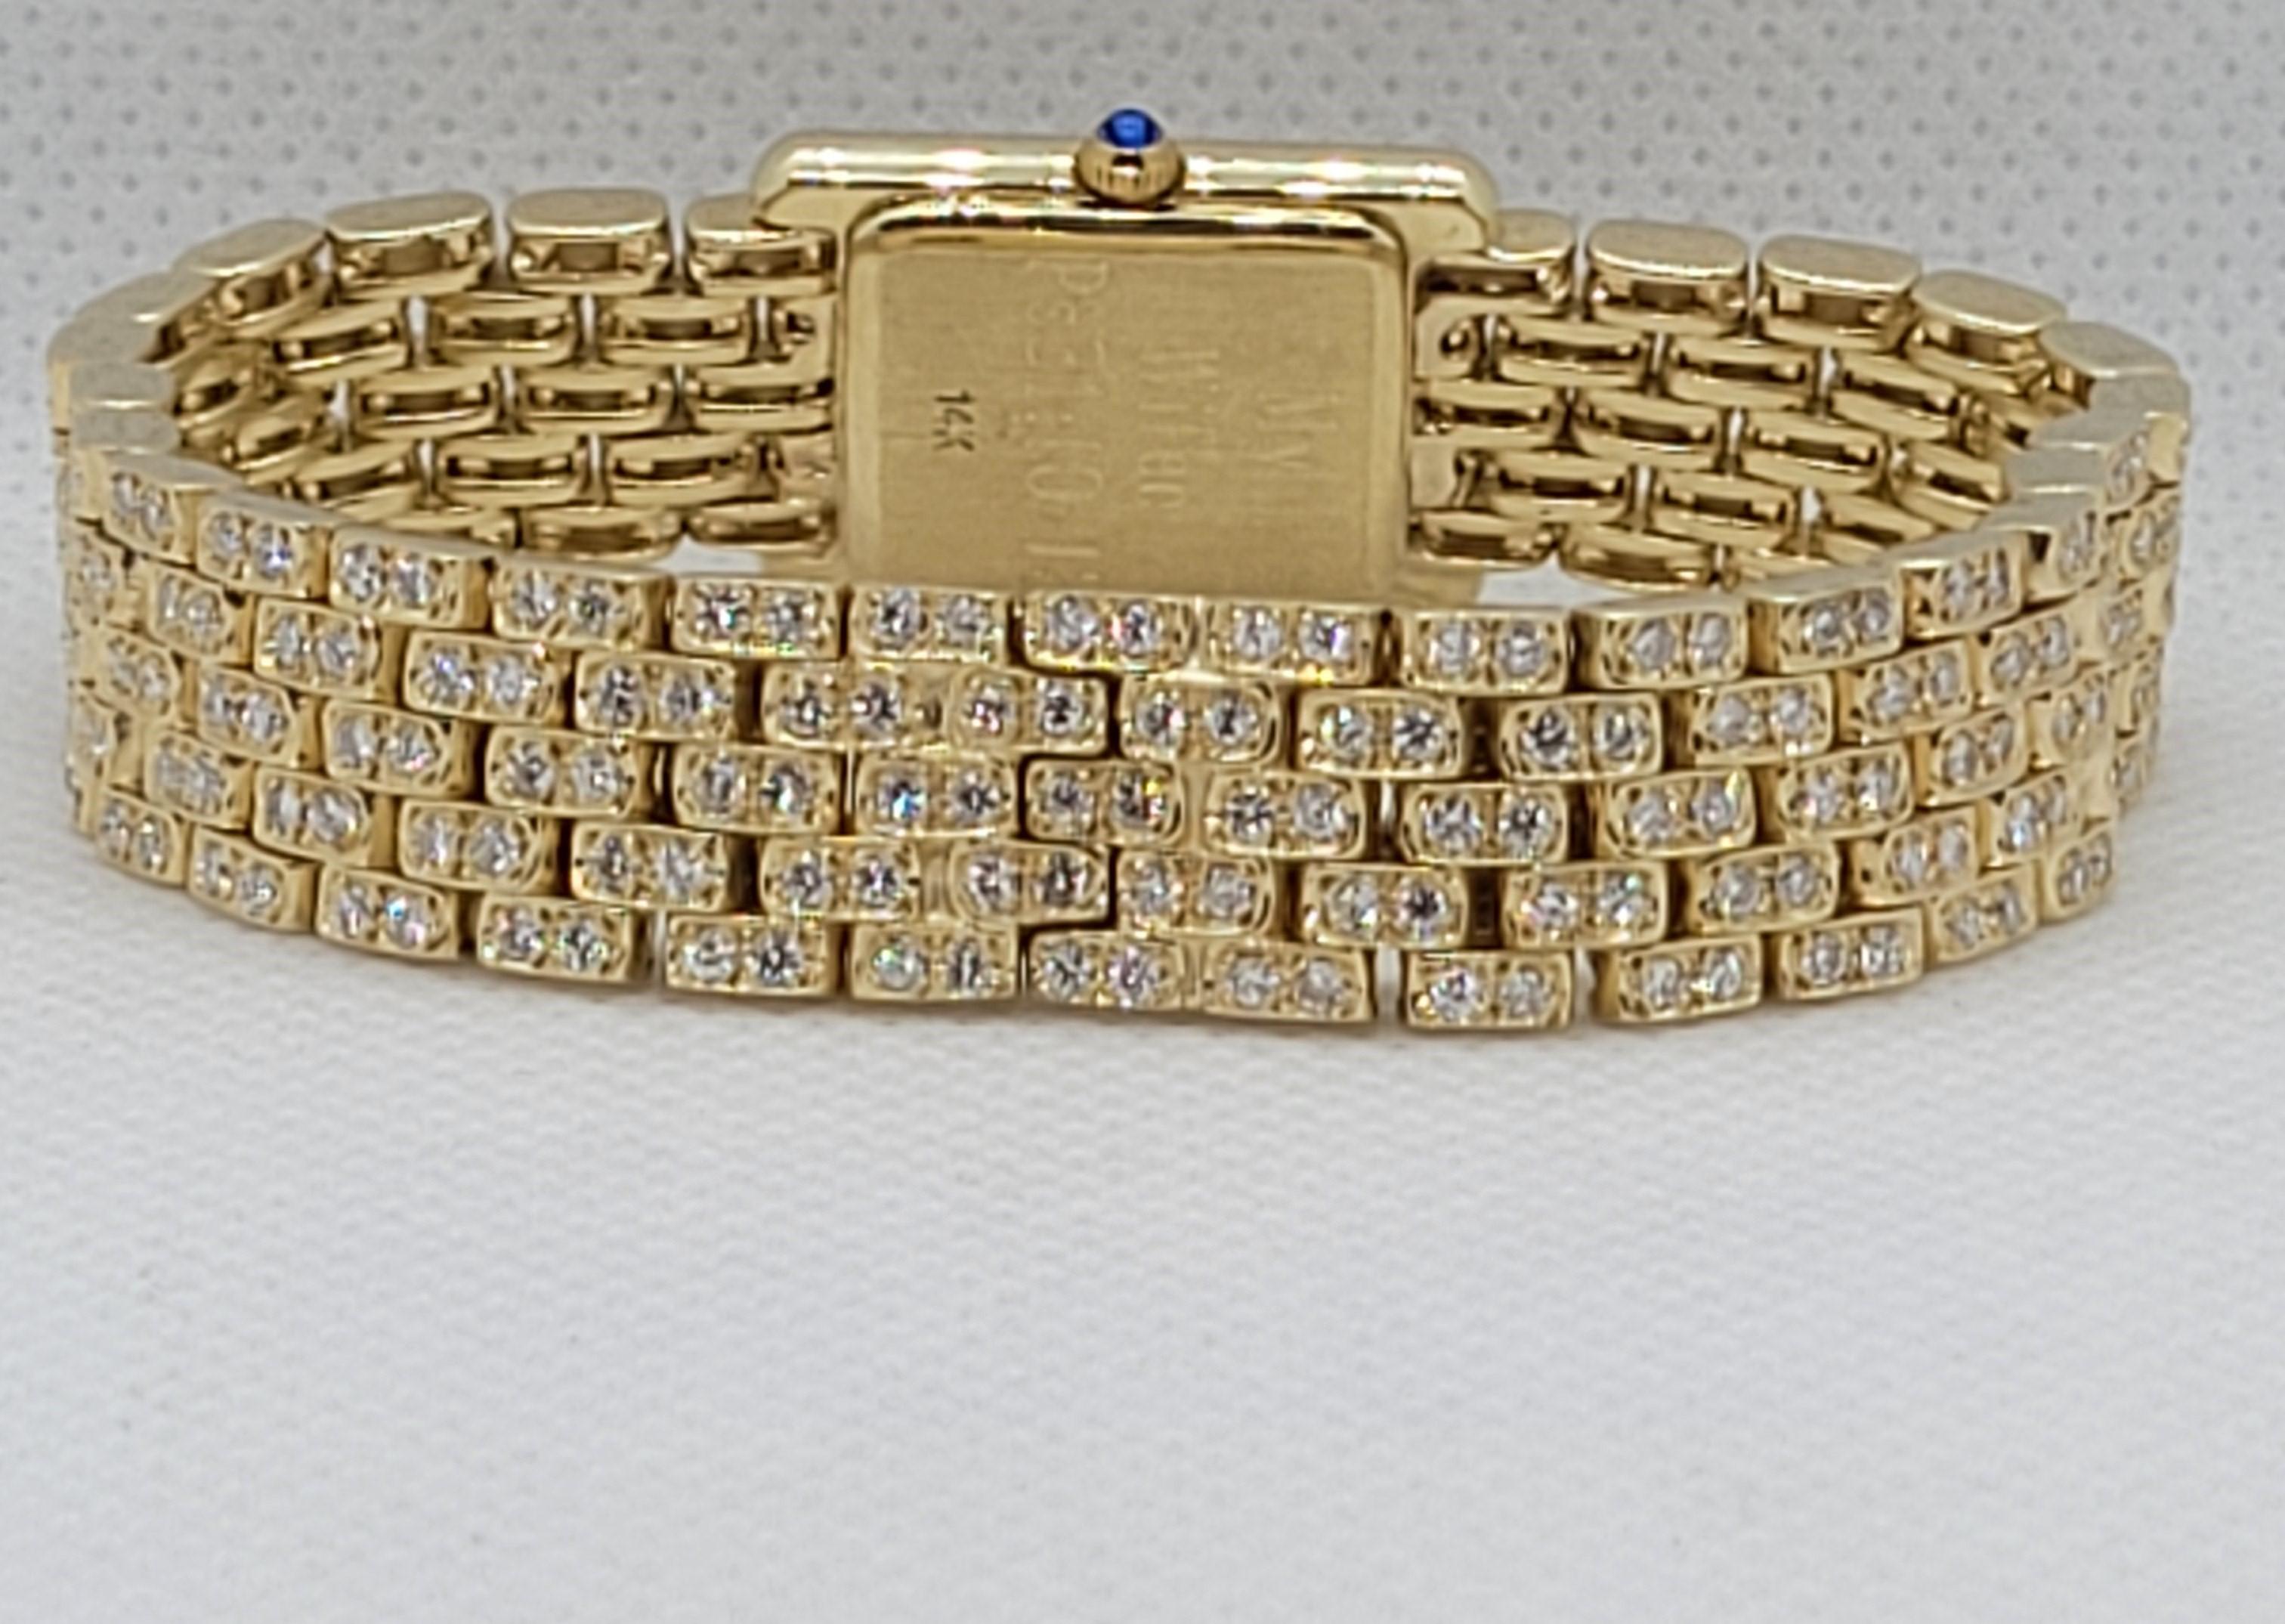 Beautiful 14kt yellow gold diamond Geneve tank with 280 diamonds of approximately 4.20cttw. The diamonds are G/H in color and VS/SI in clarity. The tank watch has a rectangular face that is 17mm x 23mm in size, and 5.15mm thick with a sapphire